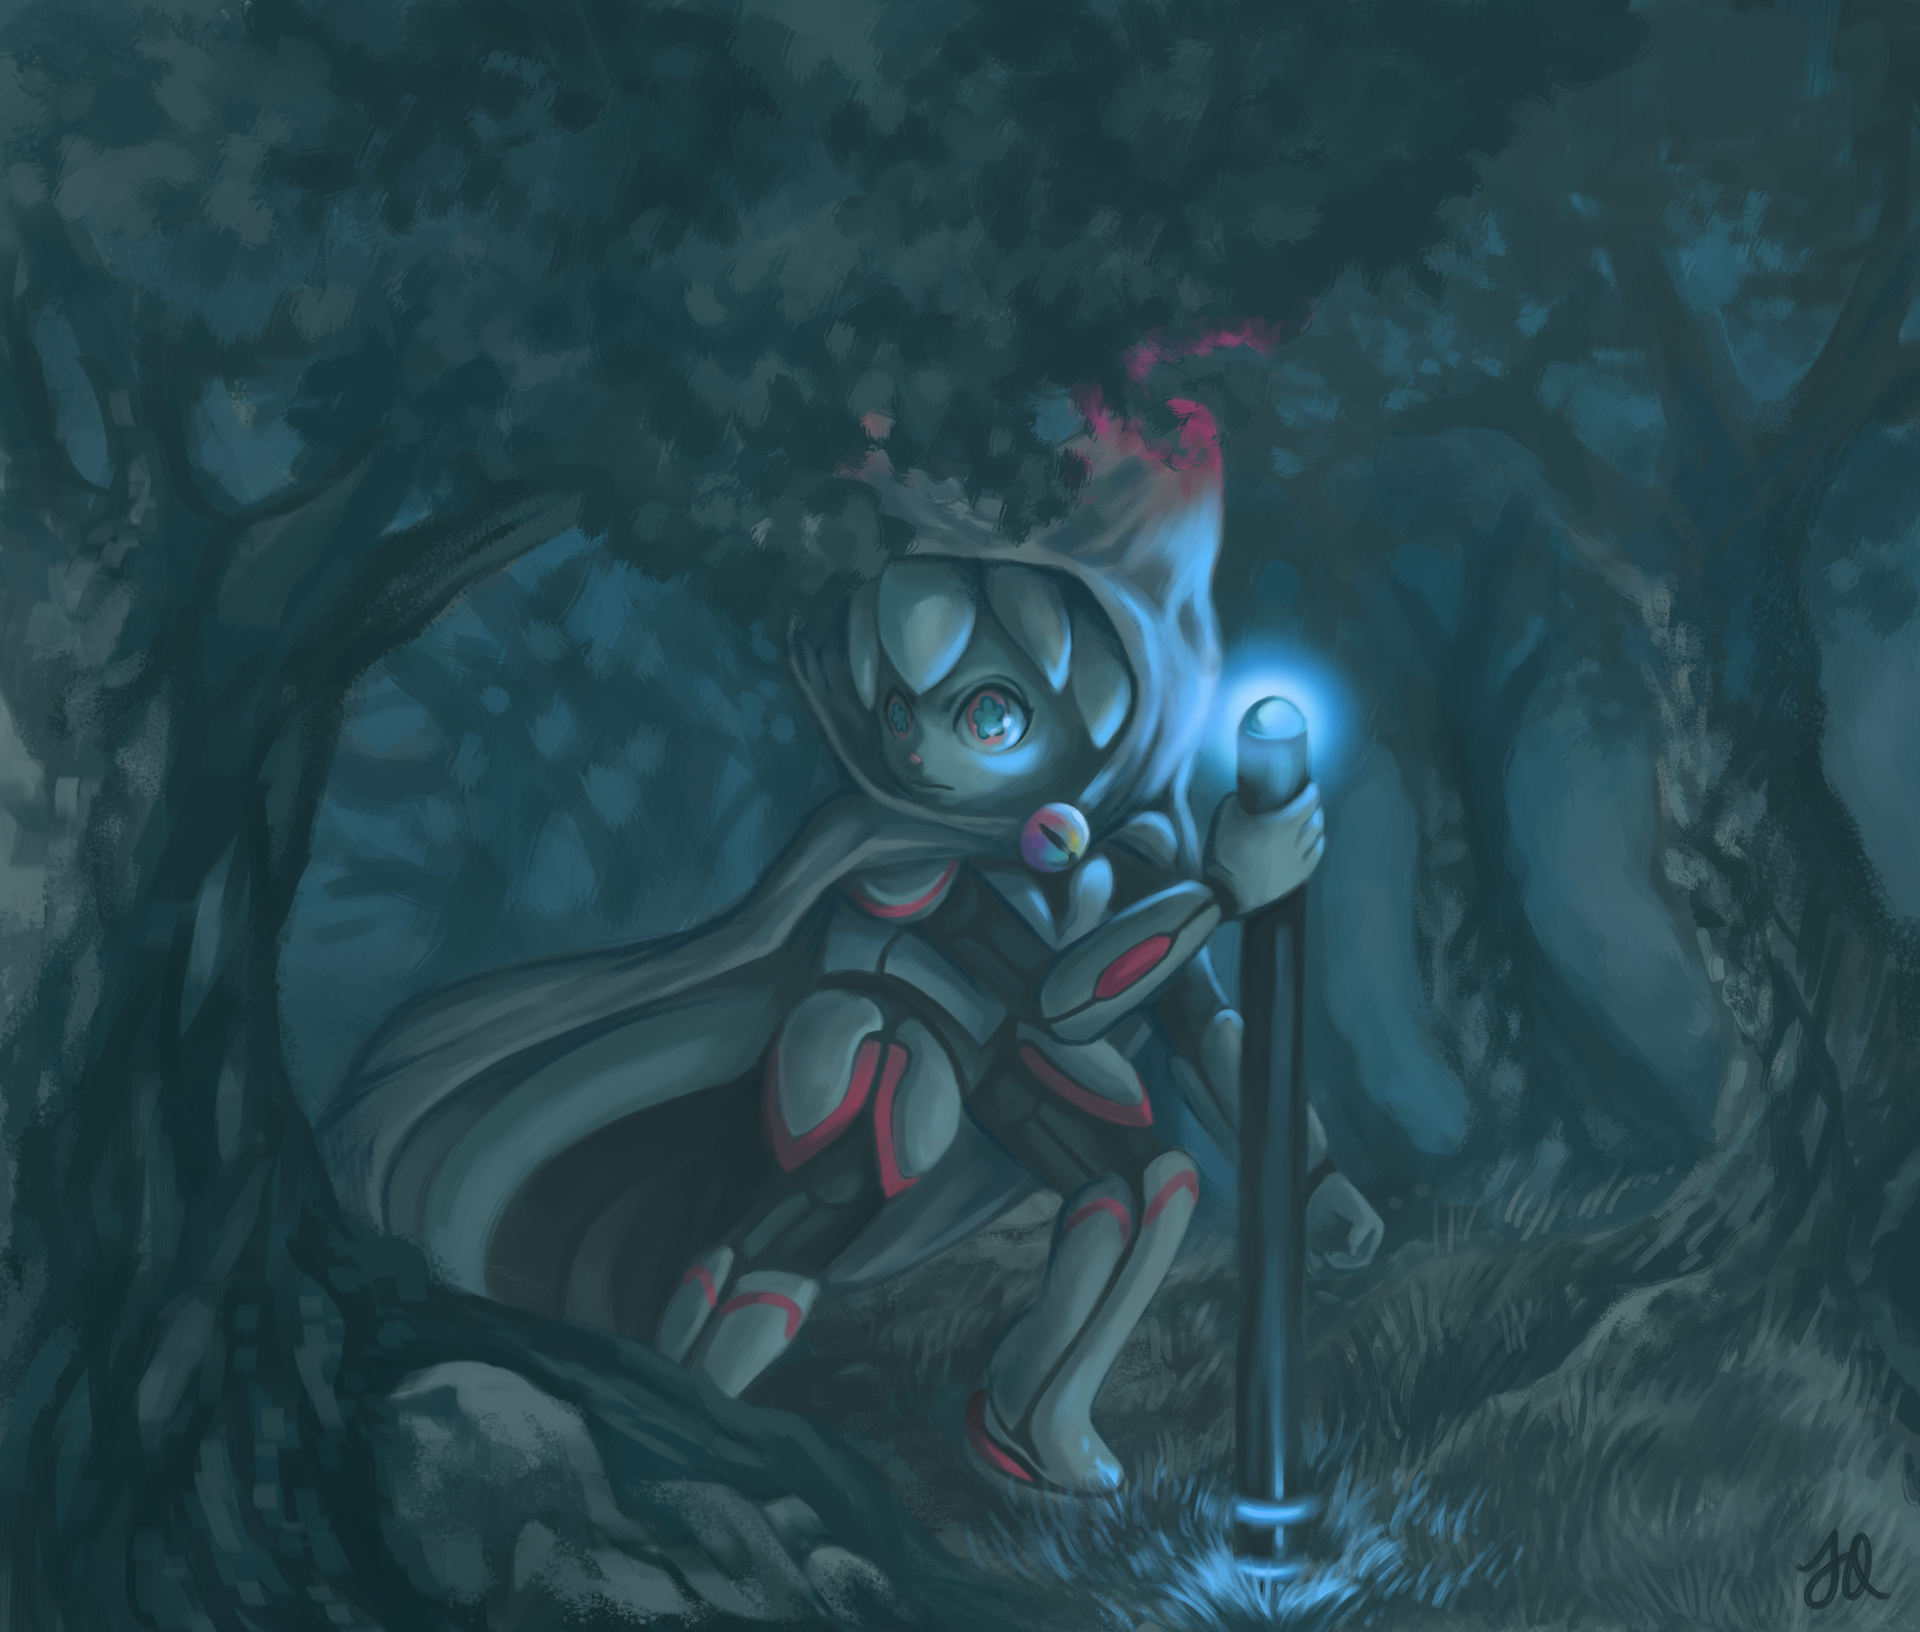 Digital painting of Kiki, the Krita mascot, wearing a mage's robe and holding her stylus as a staff, making her way through a dark and spooky forest painted in the Fediverse doom grey color scheme. There is cold blue light emanating from her stylus eraser and bands near the stylus pen tip, illuminating her face, which is turned over her shoulder as if she has seen or heard something in the woods.